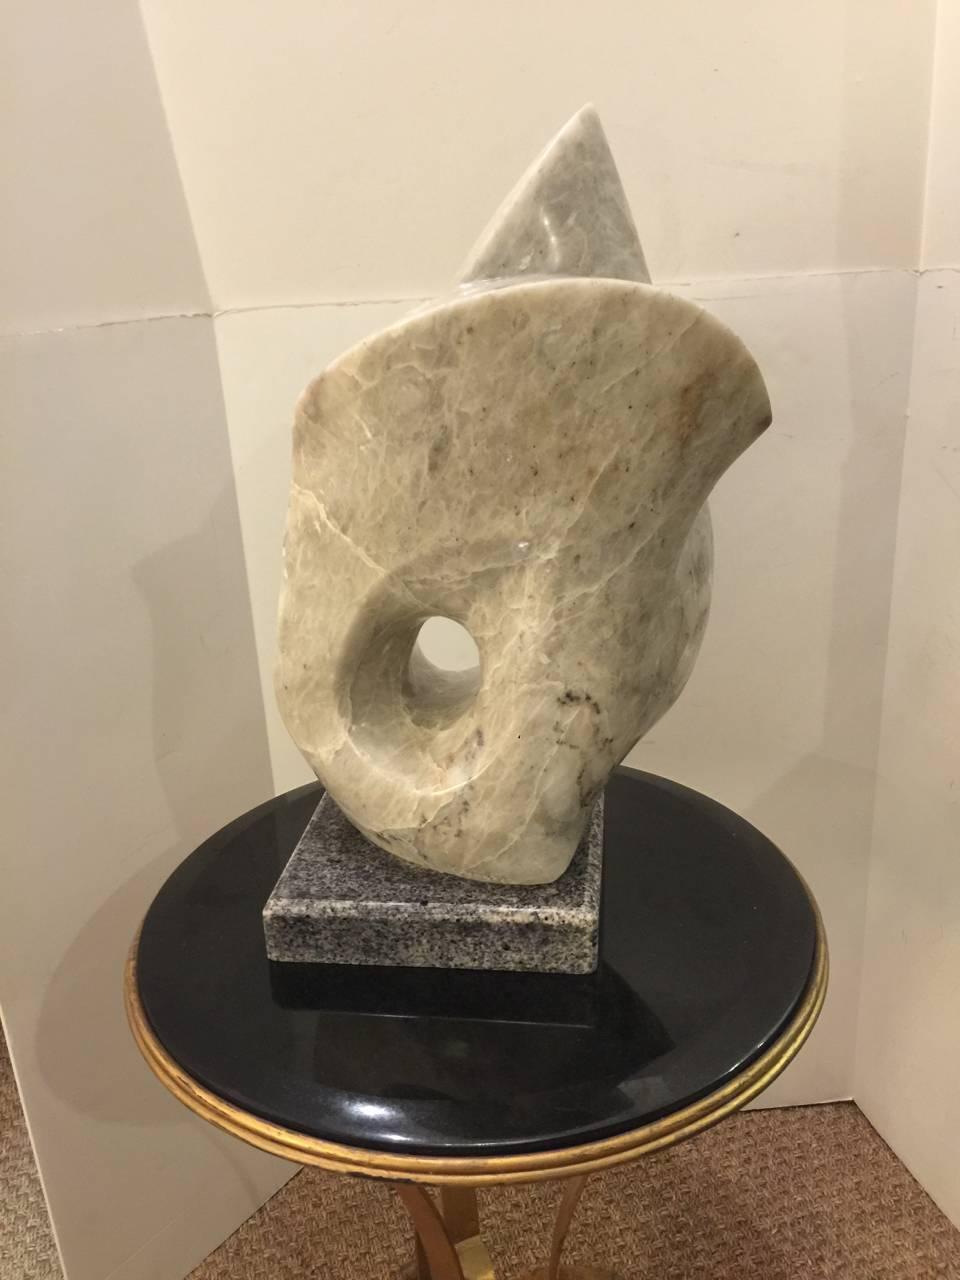 This is a substantial 20th century marble sculpture. The abstract or Brutalist form and graceful movement give life to the sculpture.